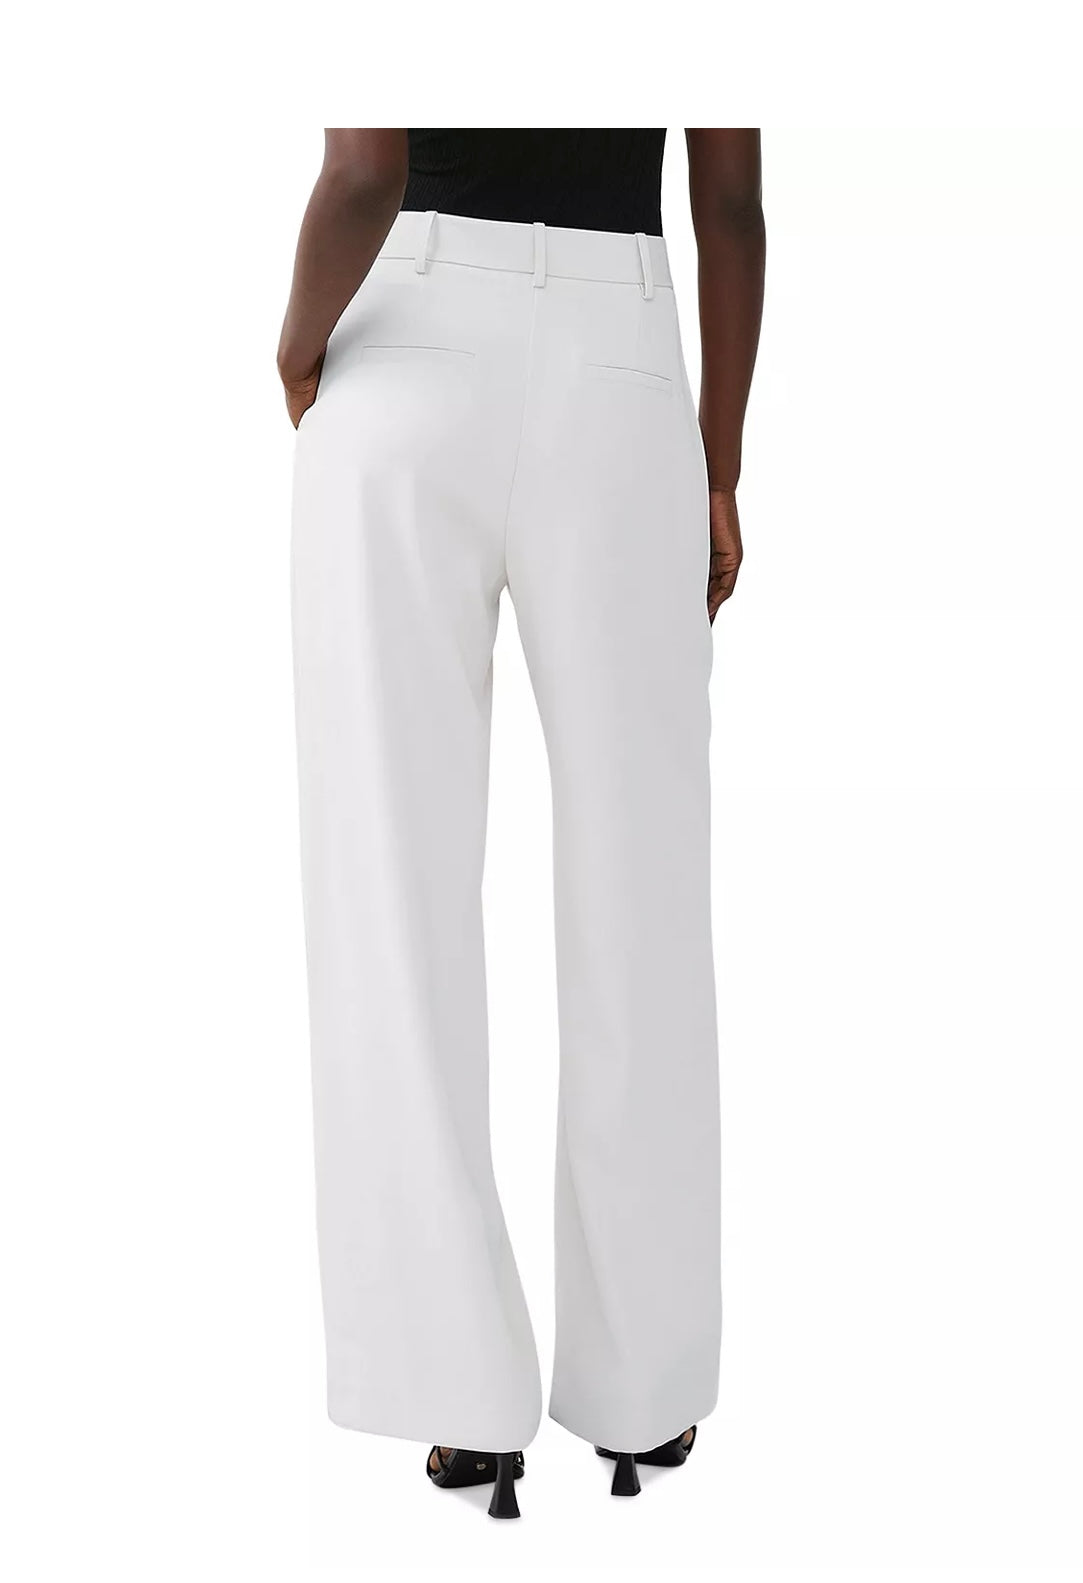 French Connection Harrie Suiting Trousers